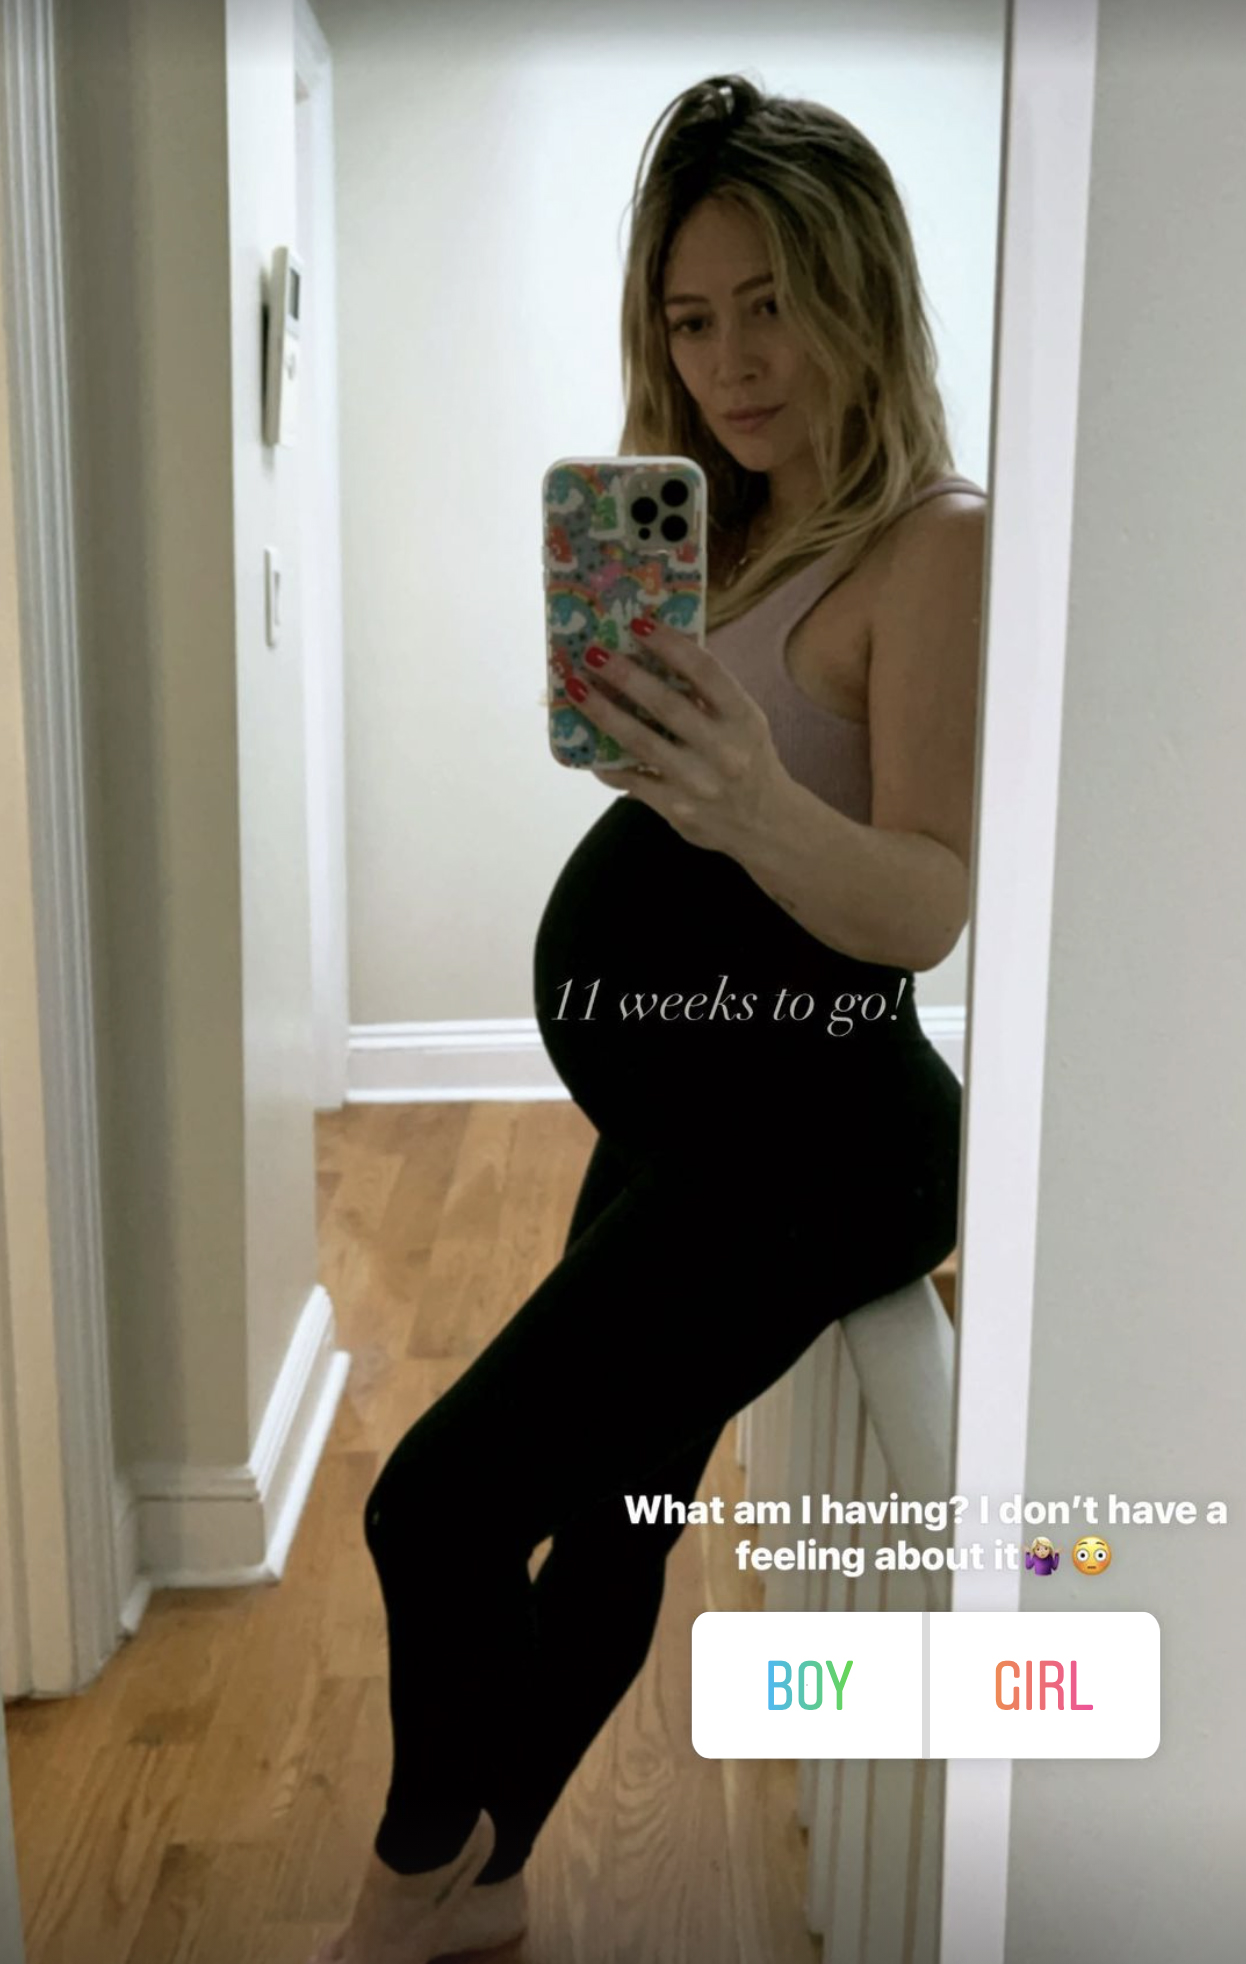 Hilary Duff has her fans on Instagram guess the sex of her next child with a baby bump selfie on Wednesday, Jan. 6, 2021.